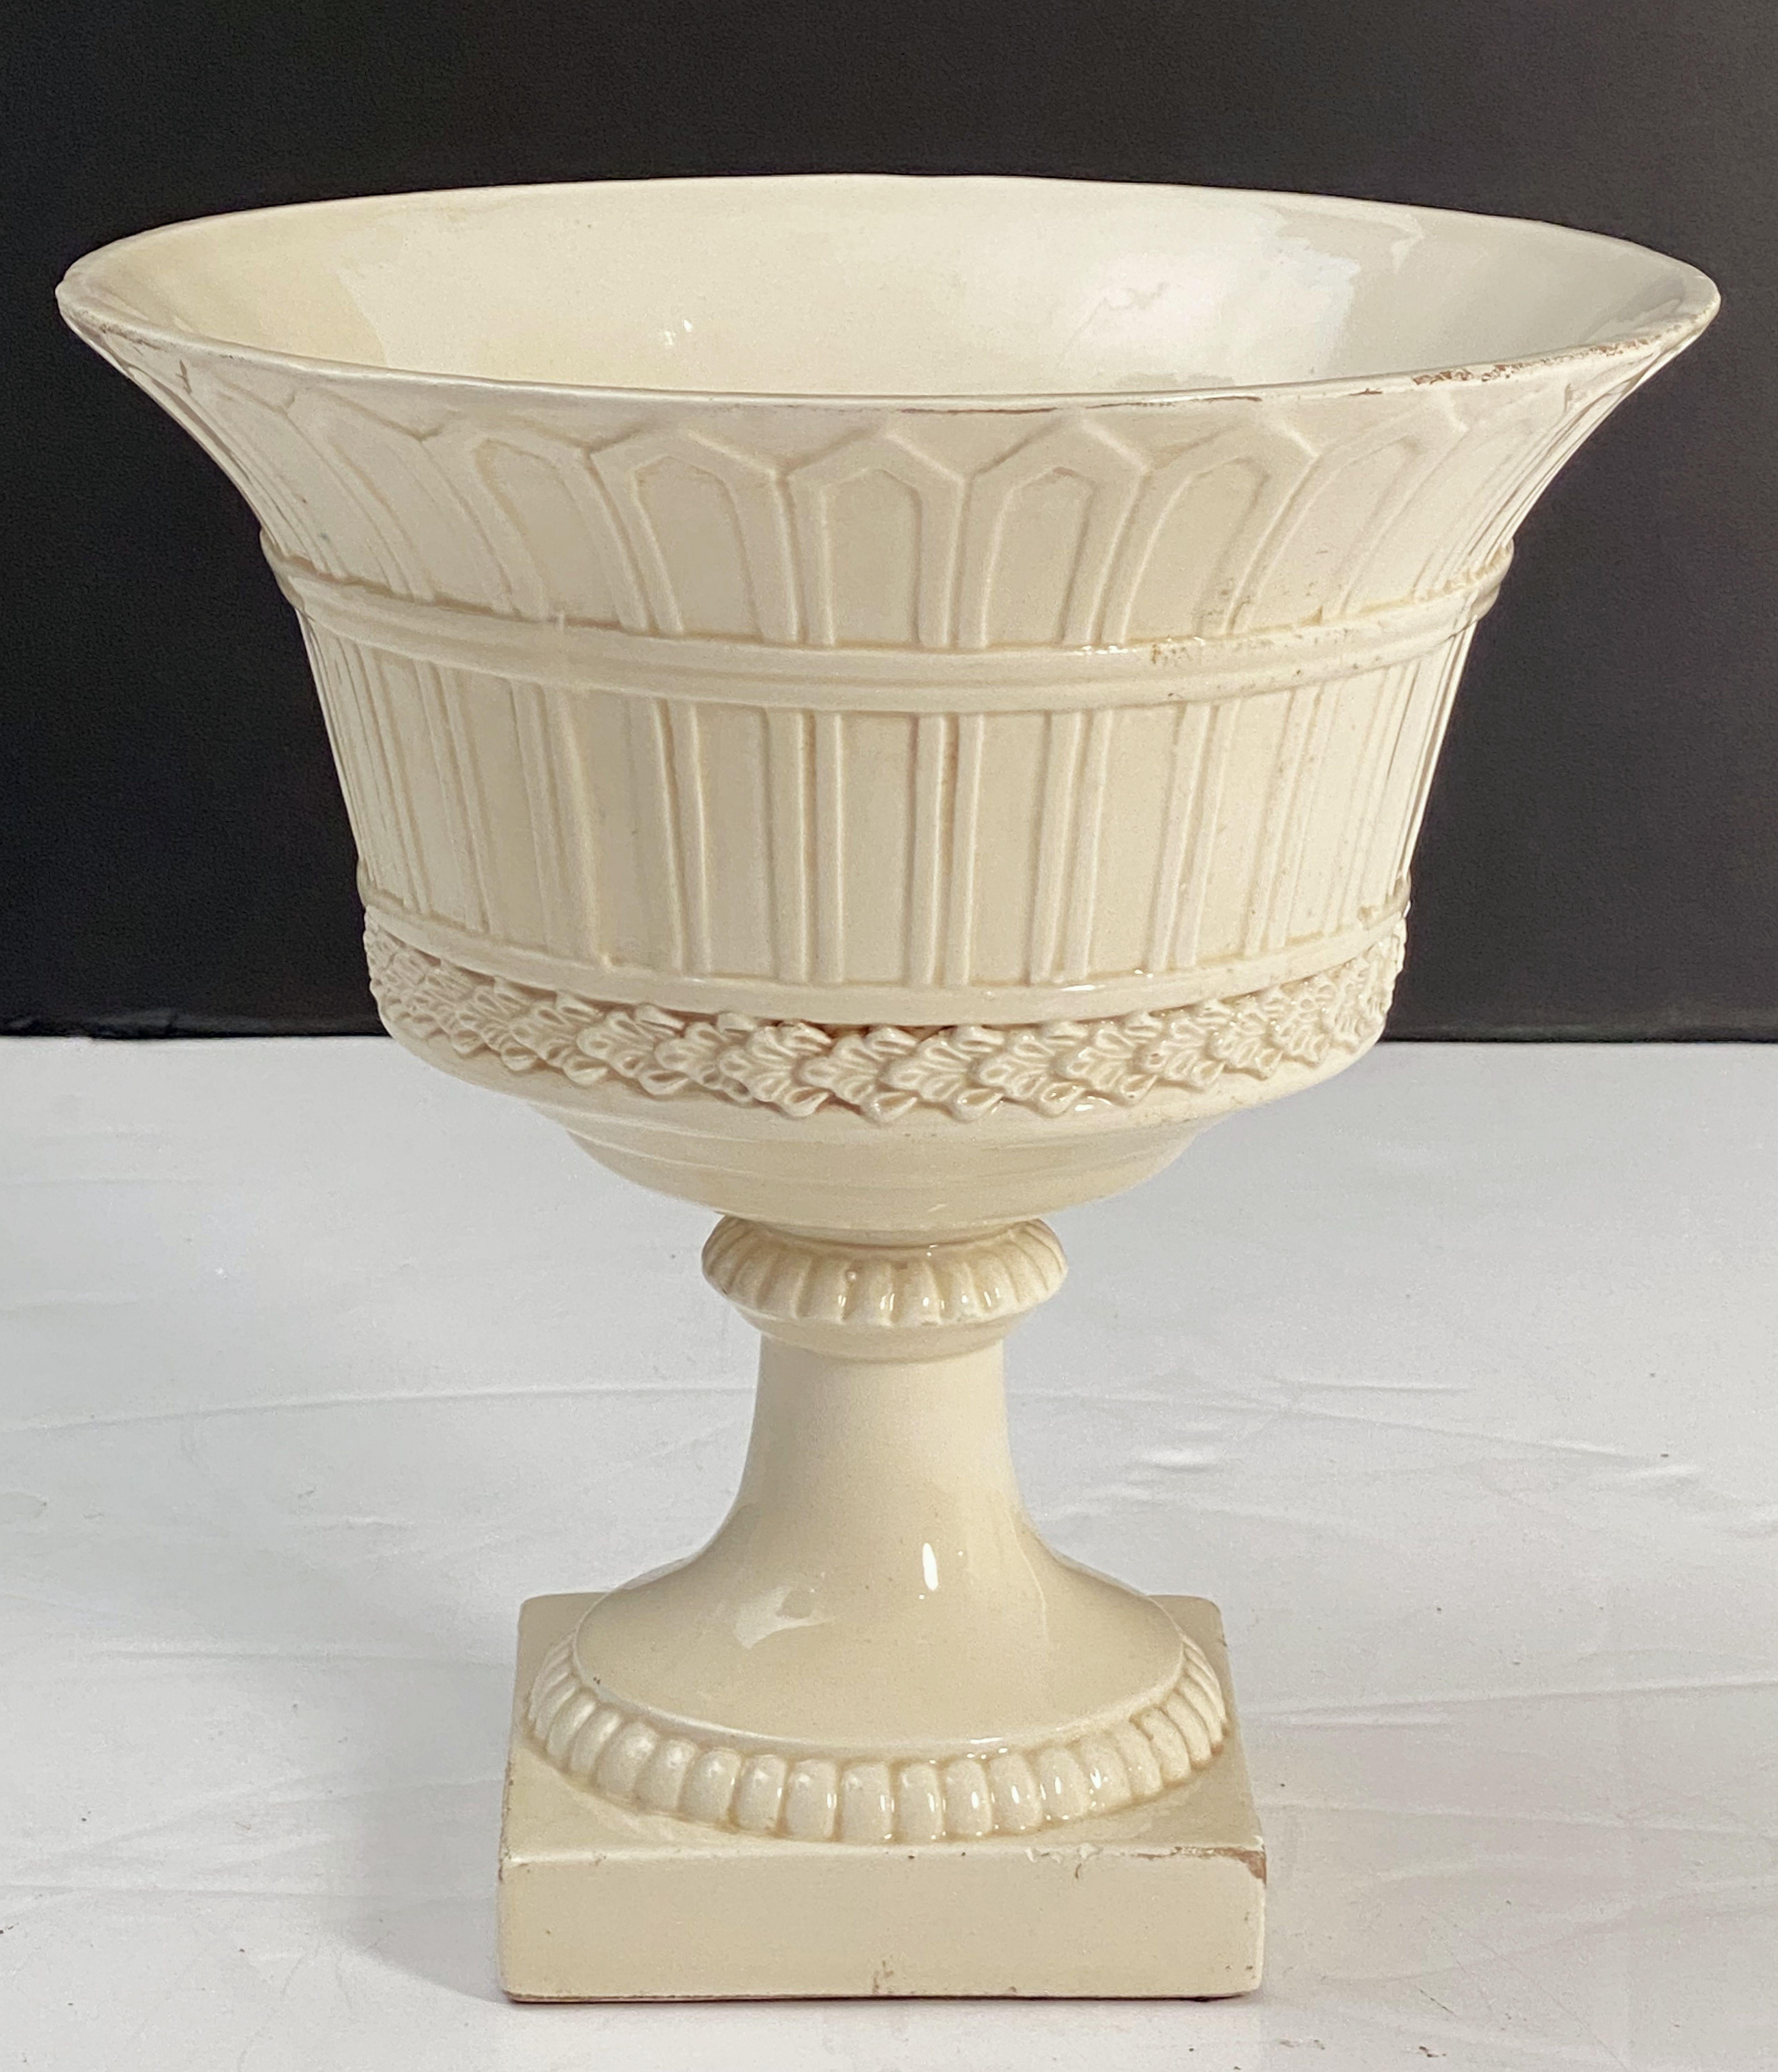 20th Century Italian Cream Ware or White Glazed Pedestal Bowl with Rose Topiary Top